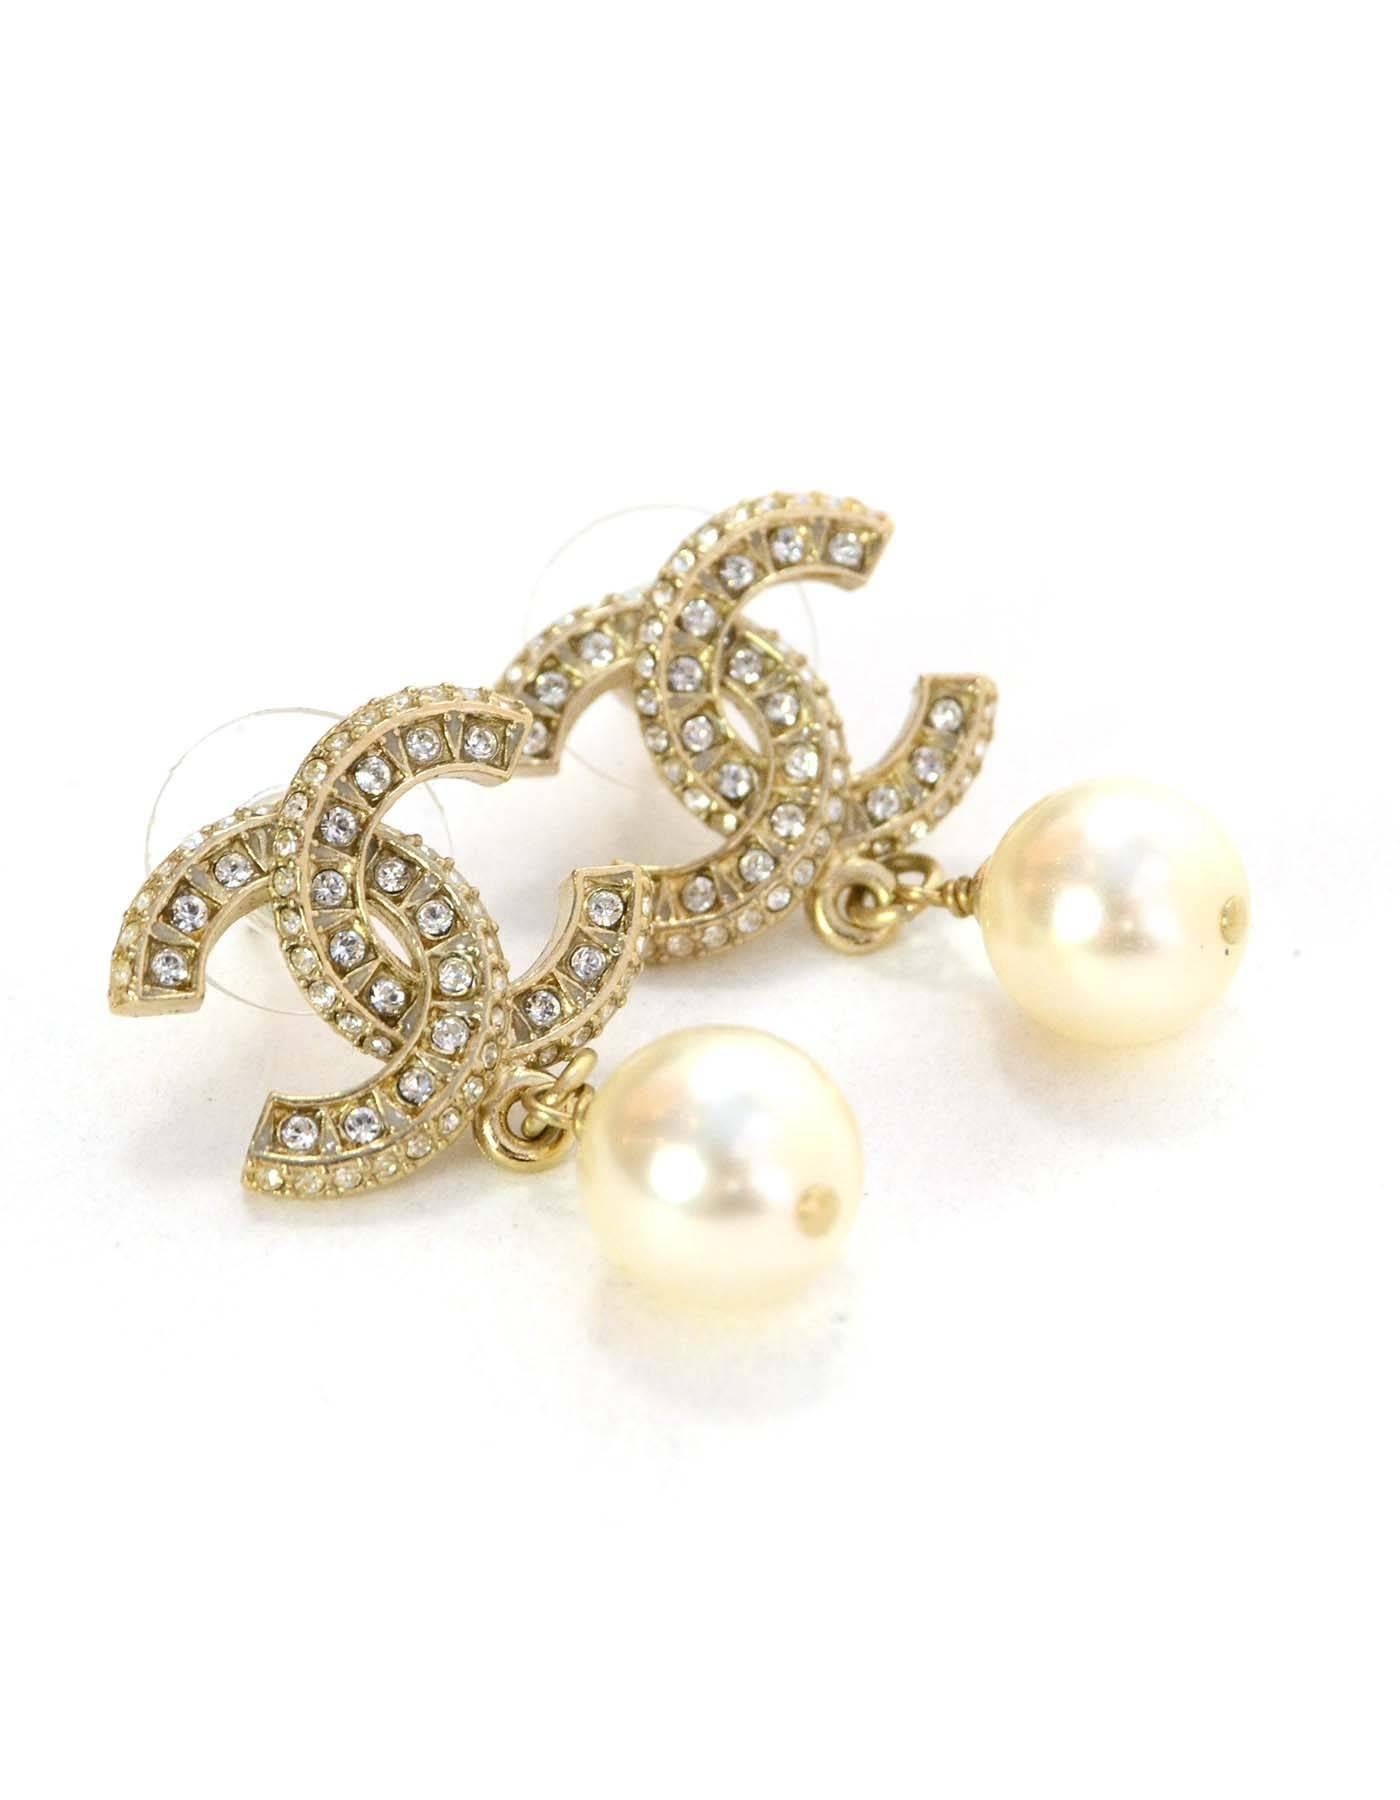 Chanel NEW '16 Crystal & Pearl CC Drop Earrings
Made In: France
Year of Production: 2016
Color: Pale gold and ivory
Materials: Metal, crystal and faux pearl
Closure: Pierced back
Stamp: F16 CC V
Overall Condition: Excellent pre-owned